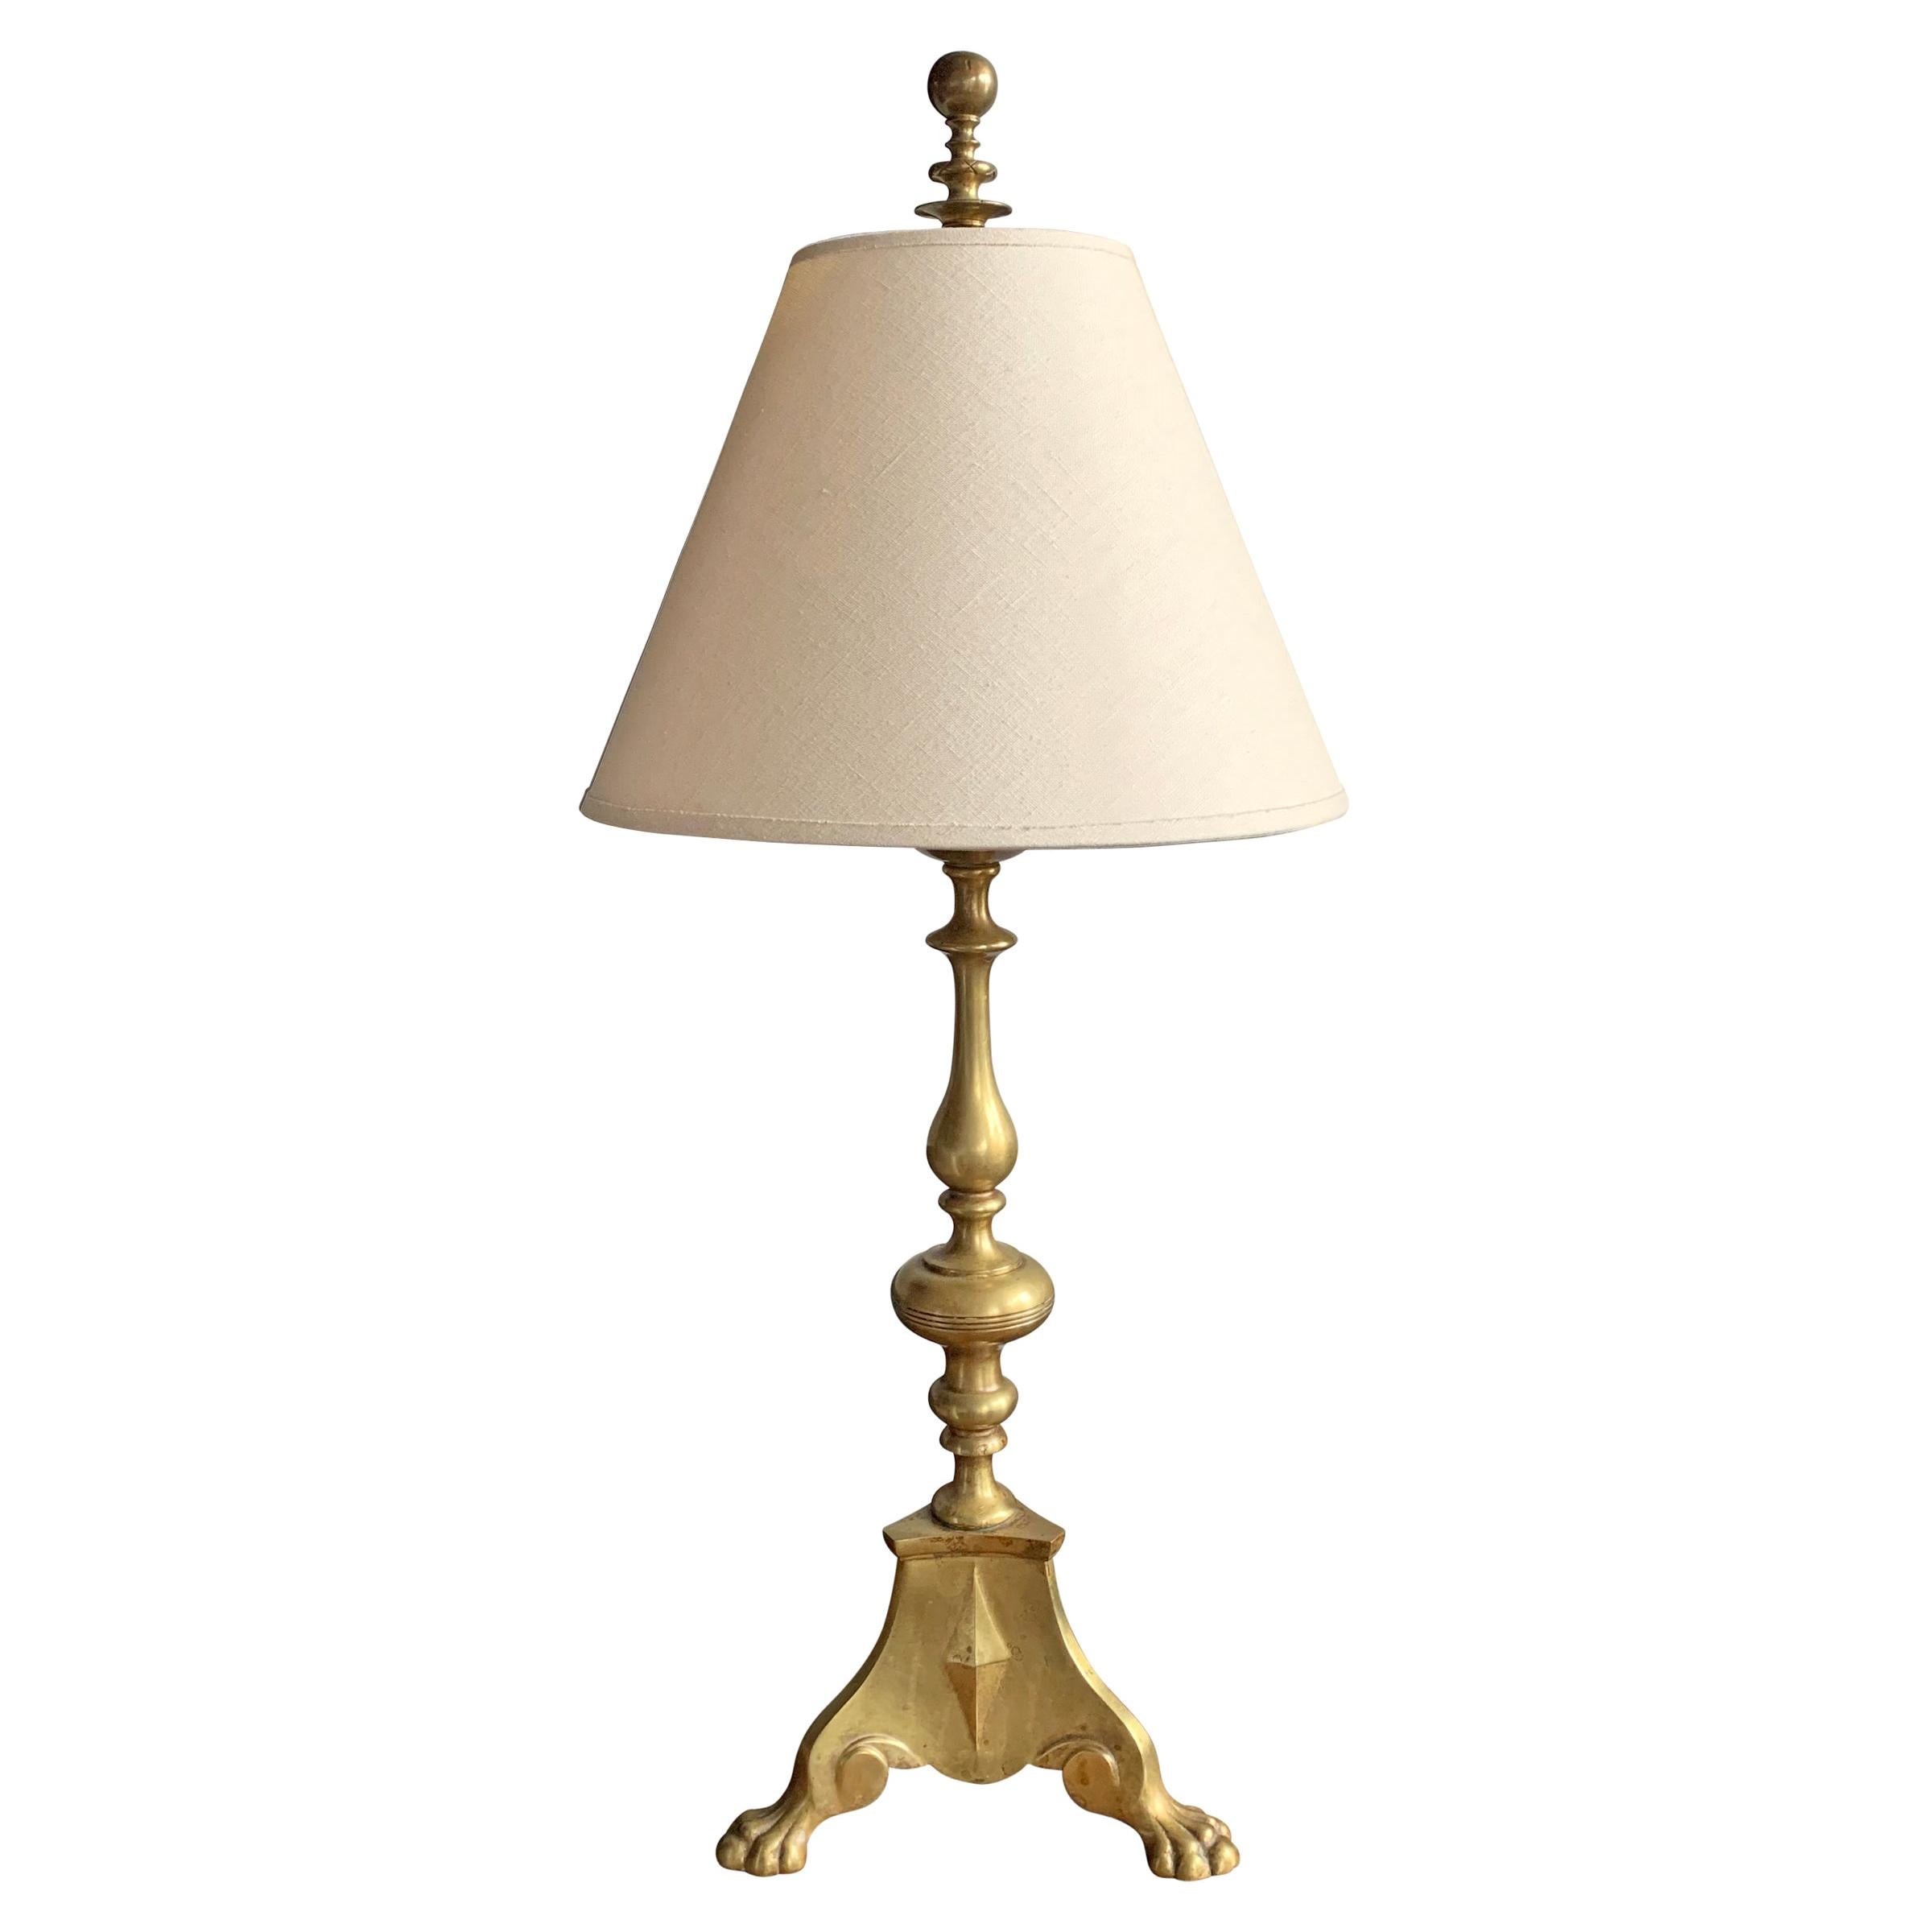 Early 20th Century French Bronze Table Lamp